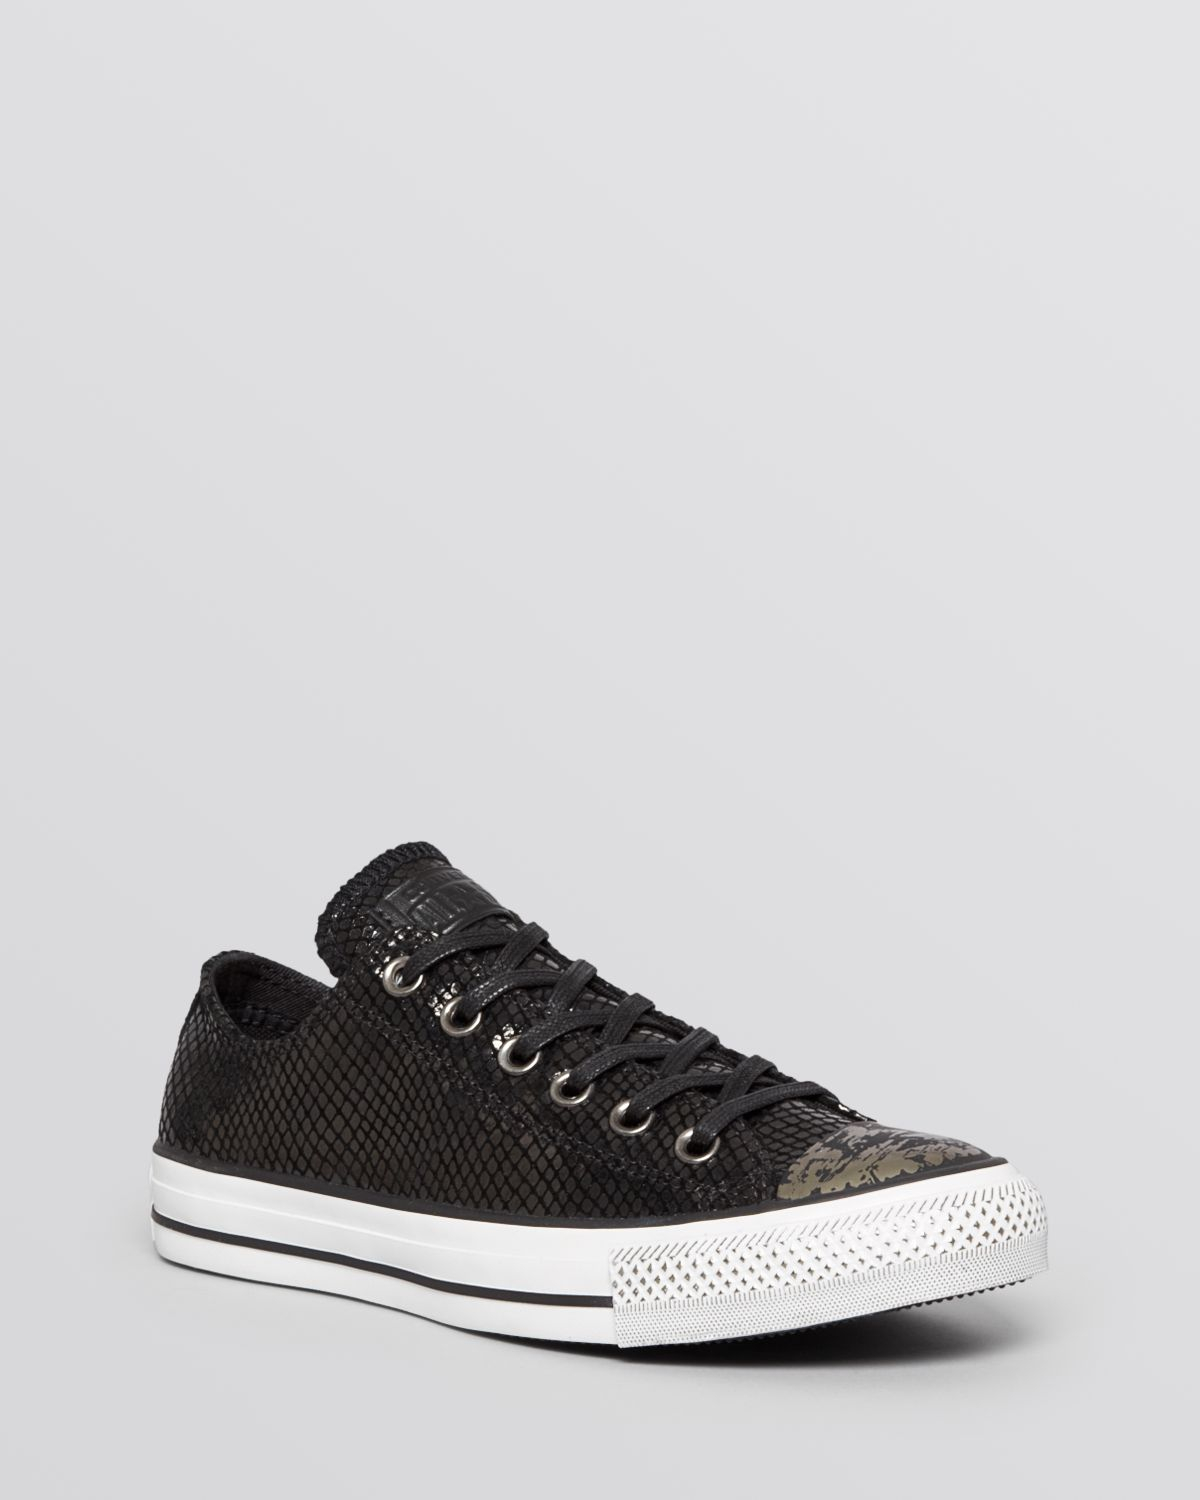 Converse Flat Lace Up Sneakers - Low Top Metallic in Black - Lyst